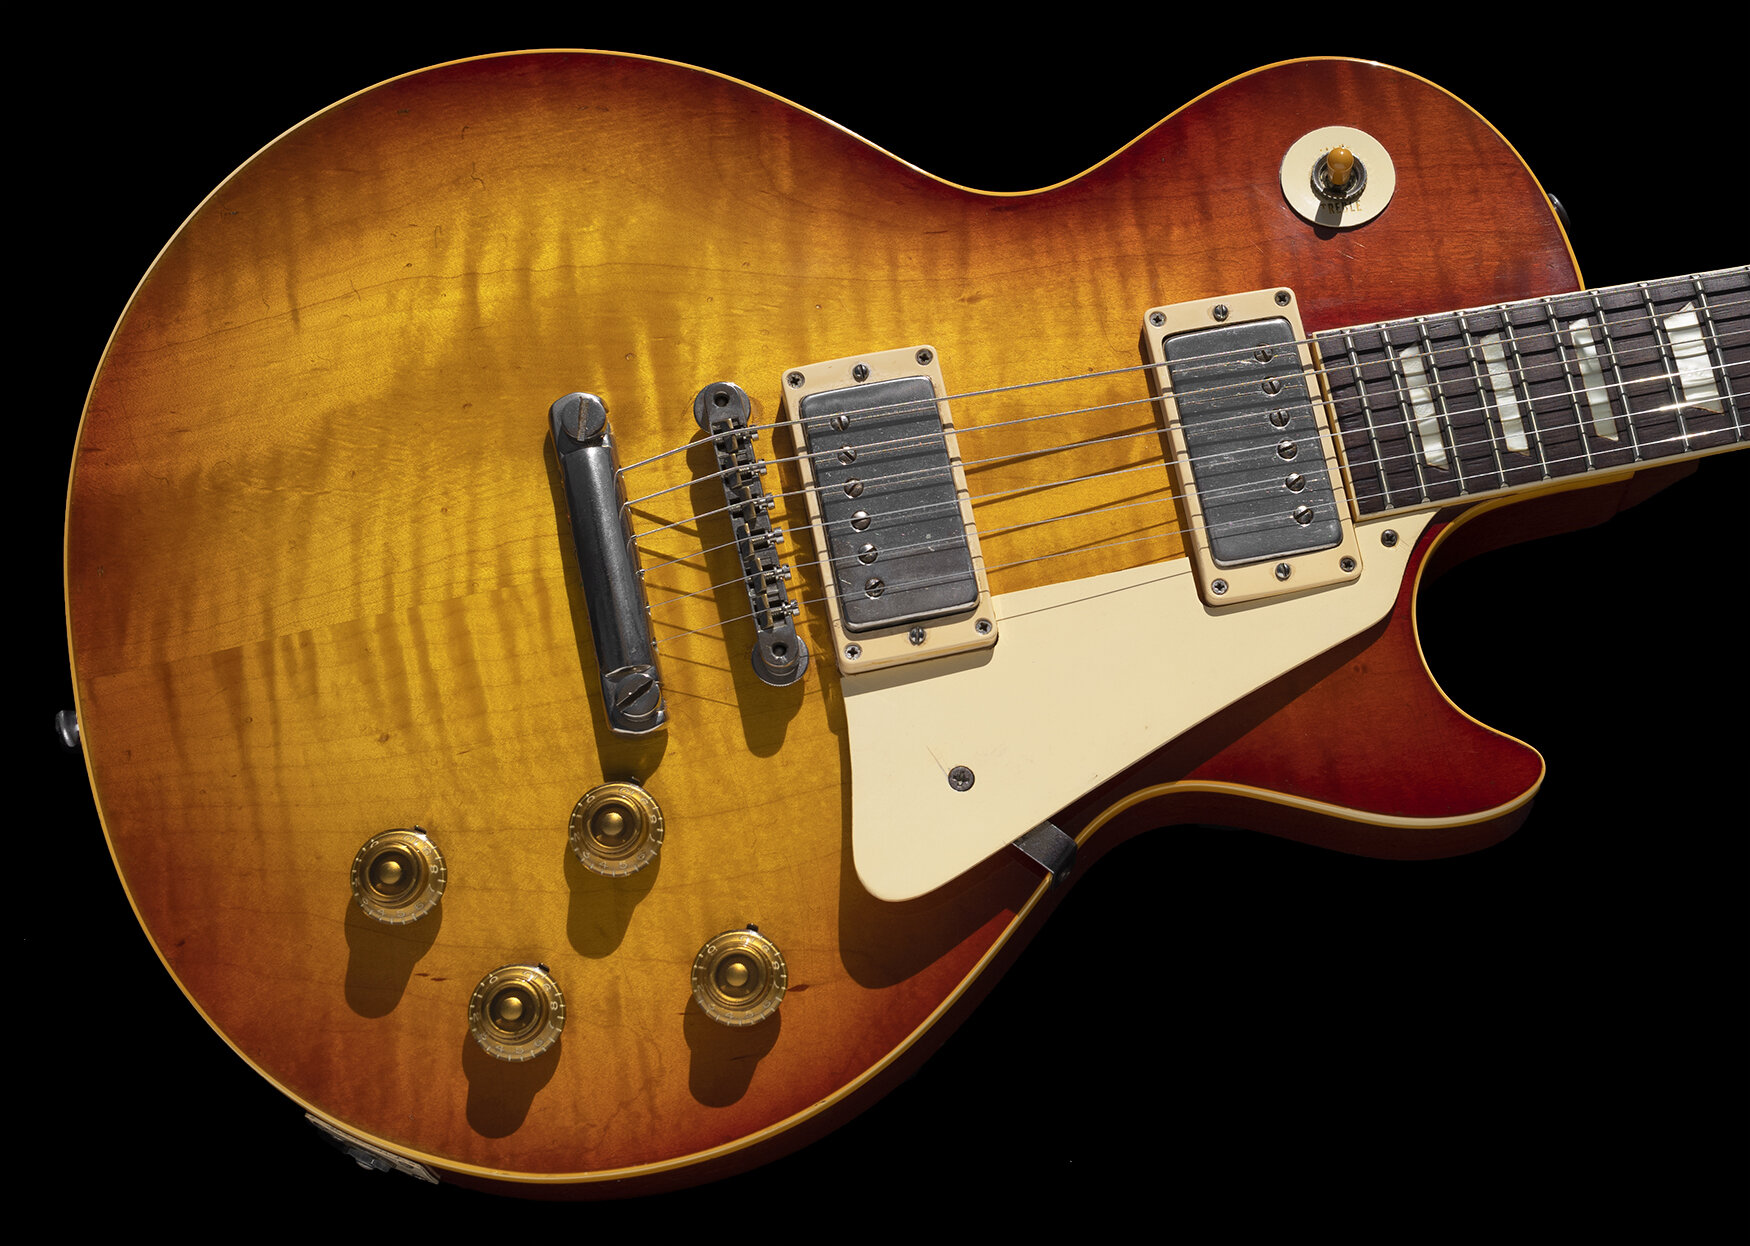 1958 Les Paul Standard, very pretty color and figured wood